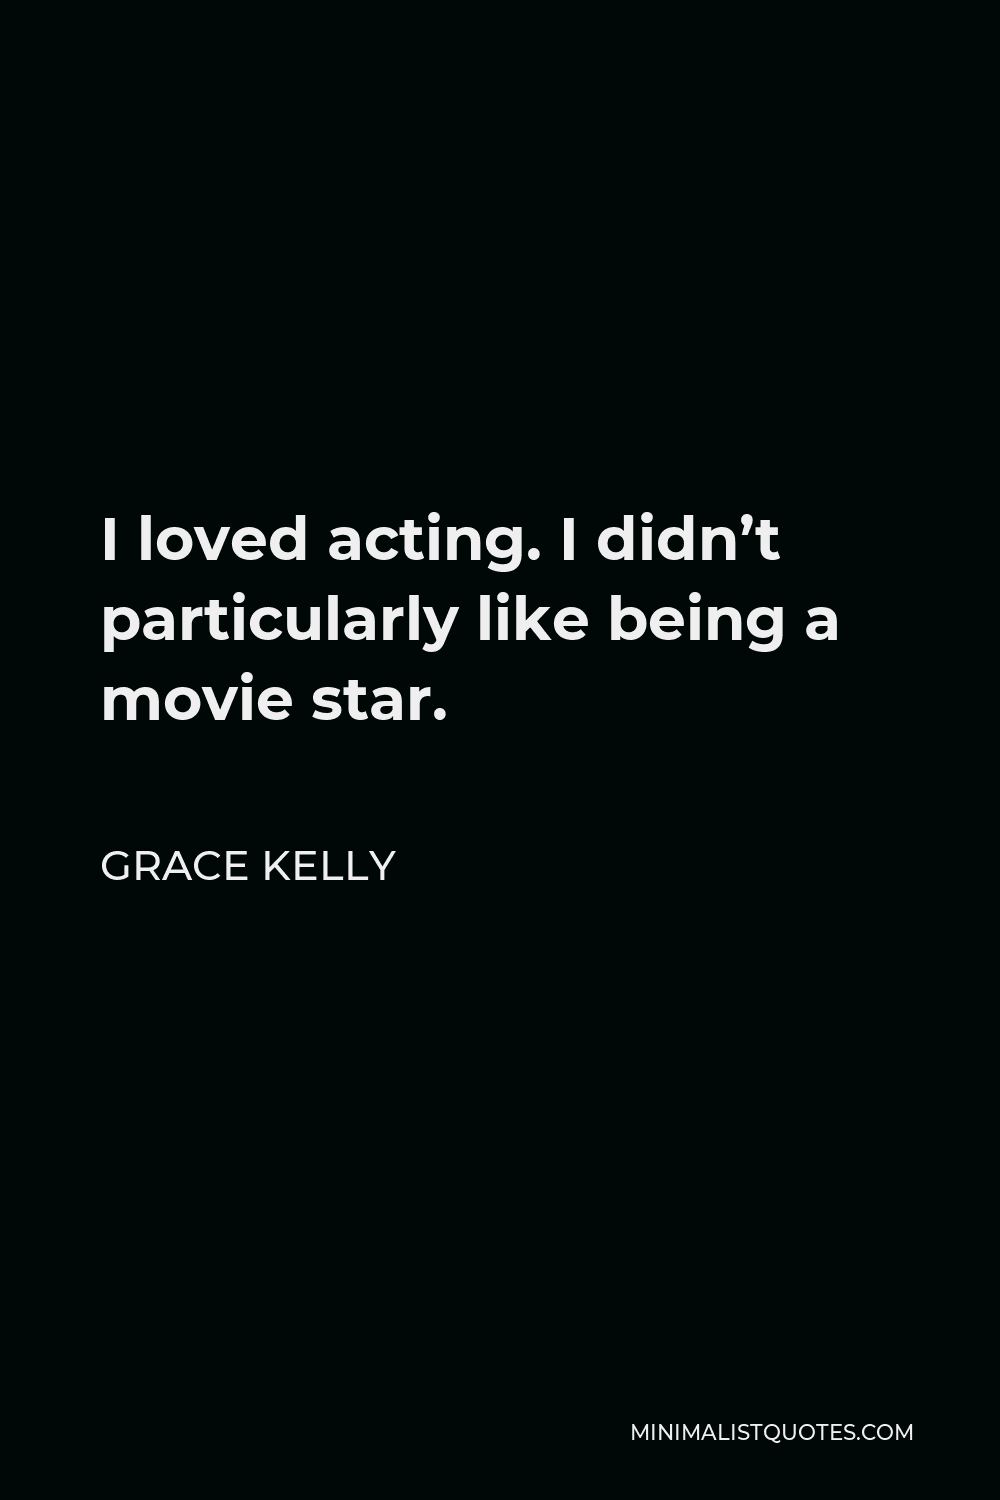 Grace Kelly Quote - I loved acting. I didn’t particularly like being a movie star.